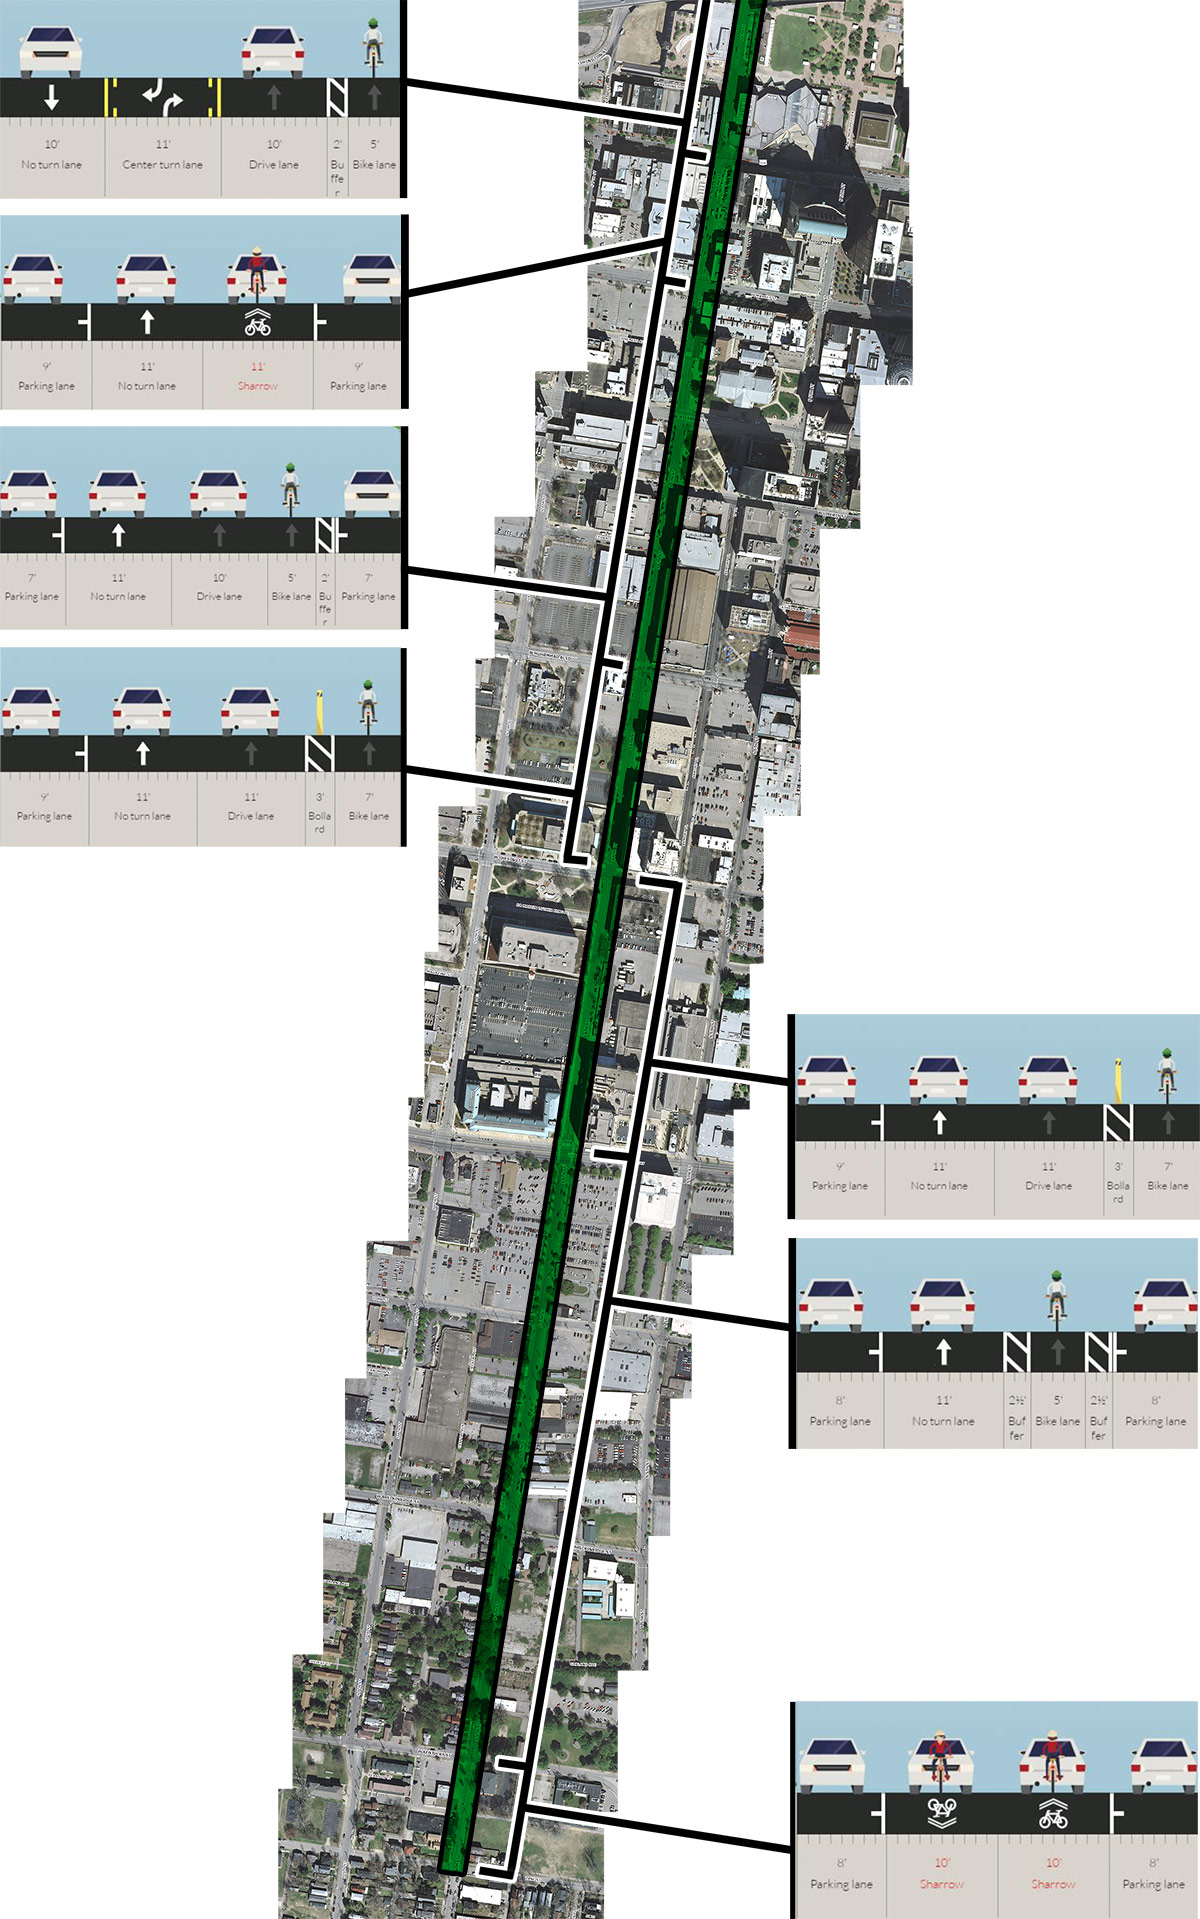 Route of the new Sixth Street bike lane showing varying lane treatments. (Montage by Broken Sidewalk)